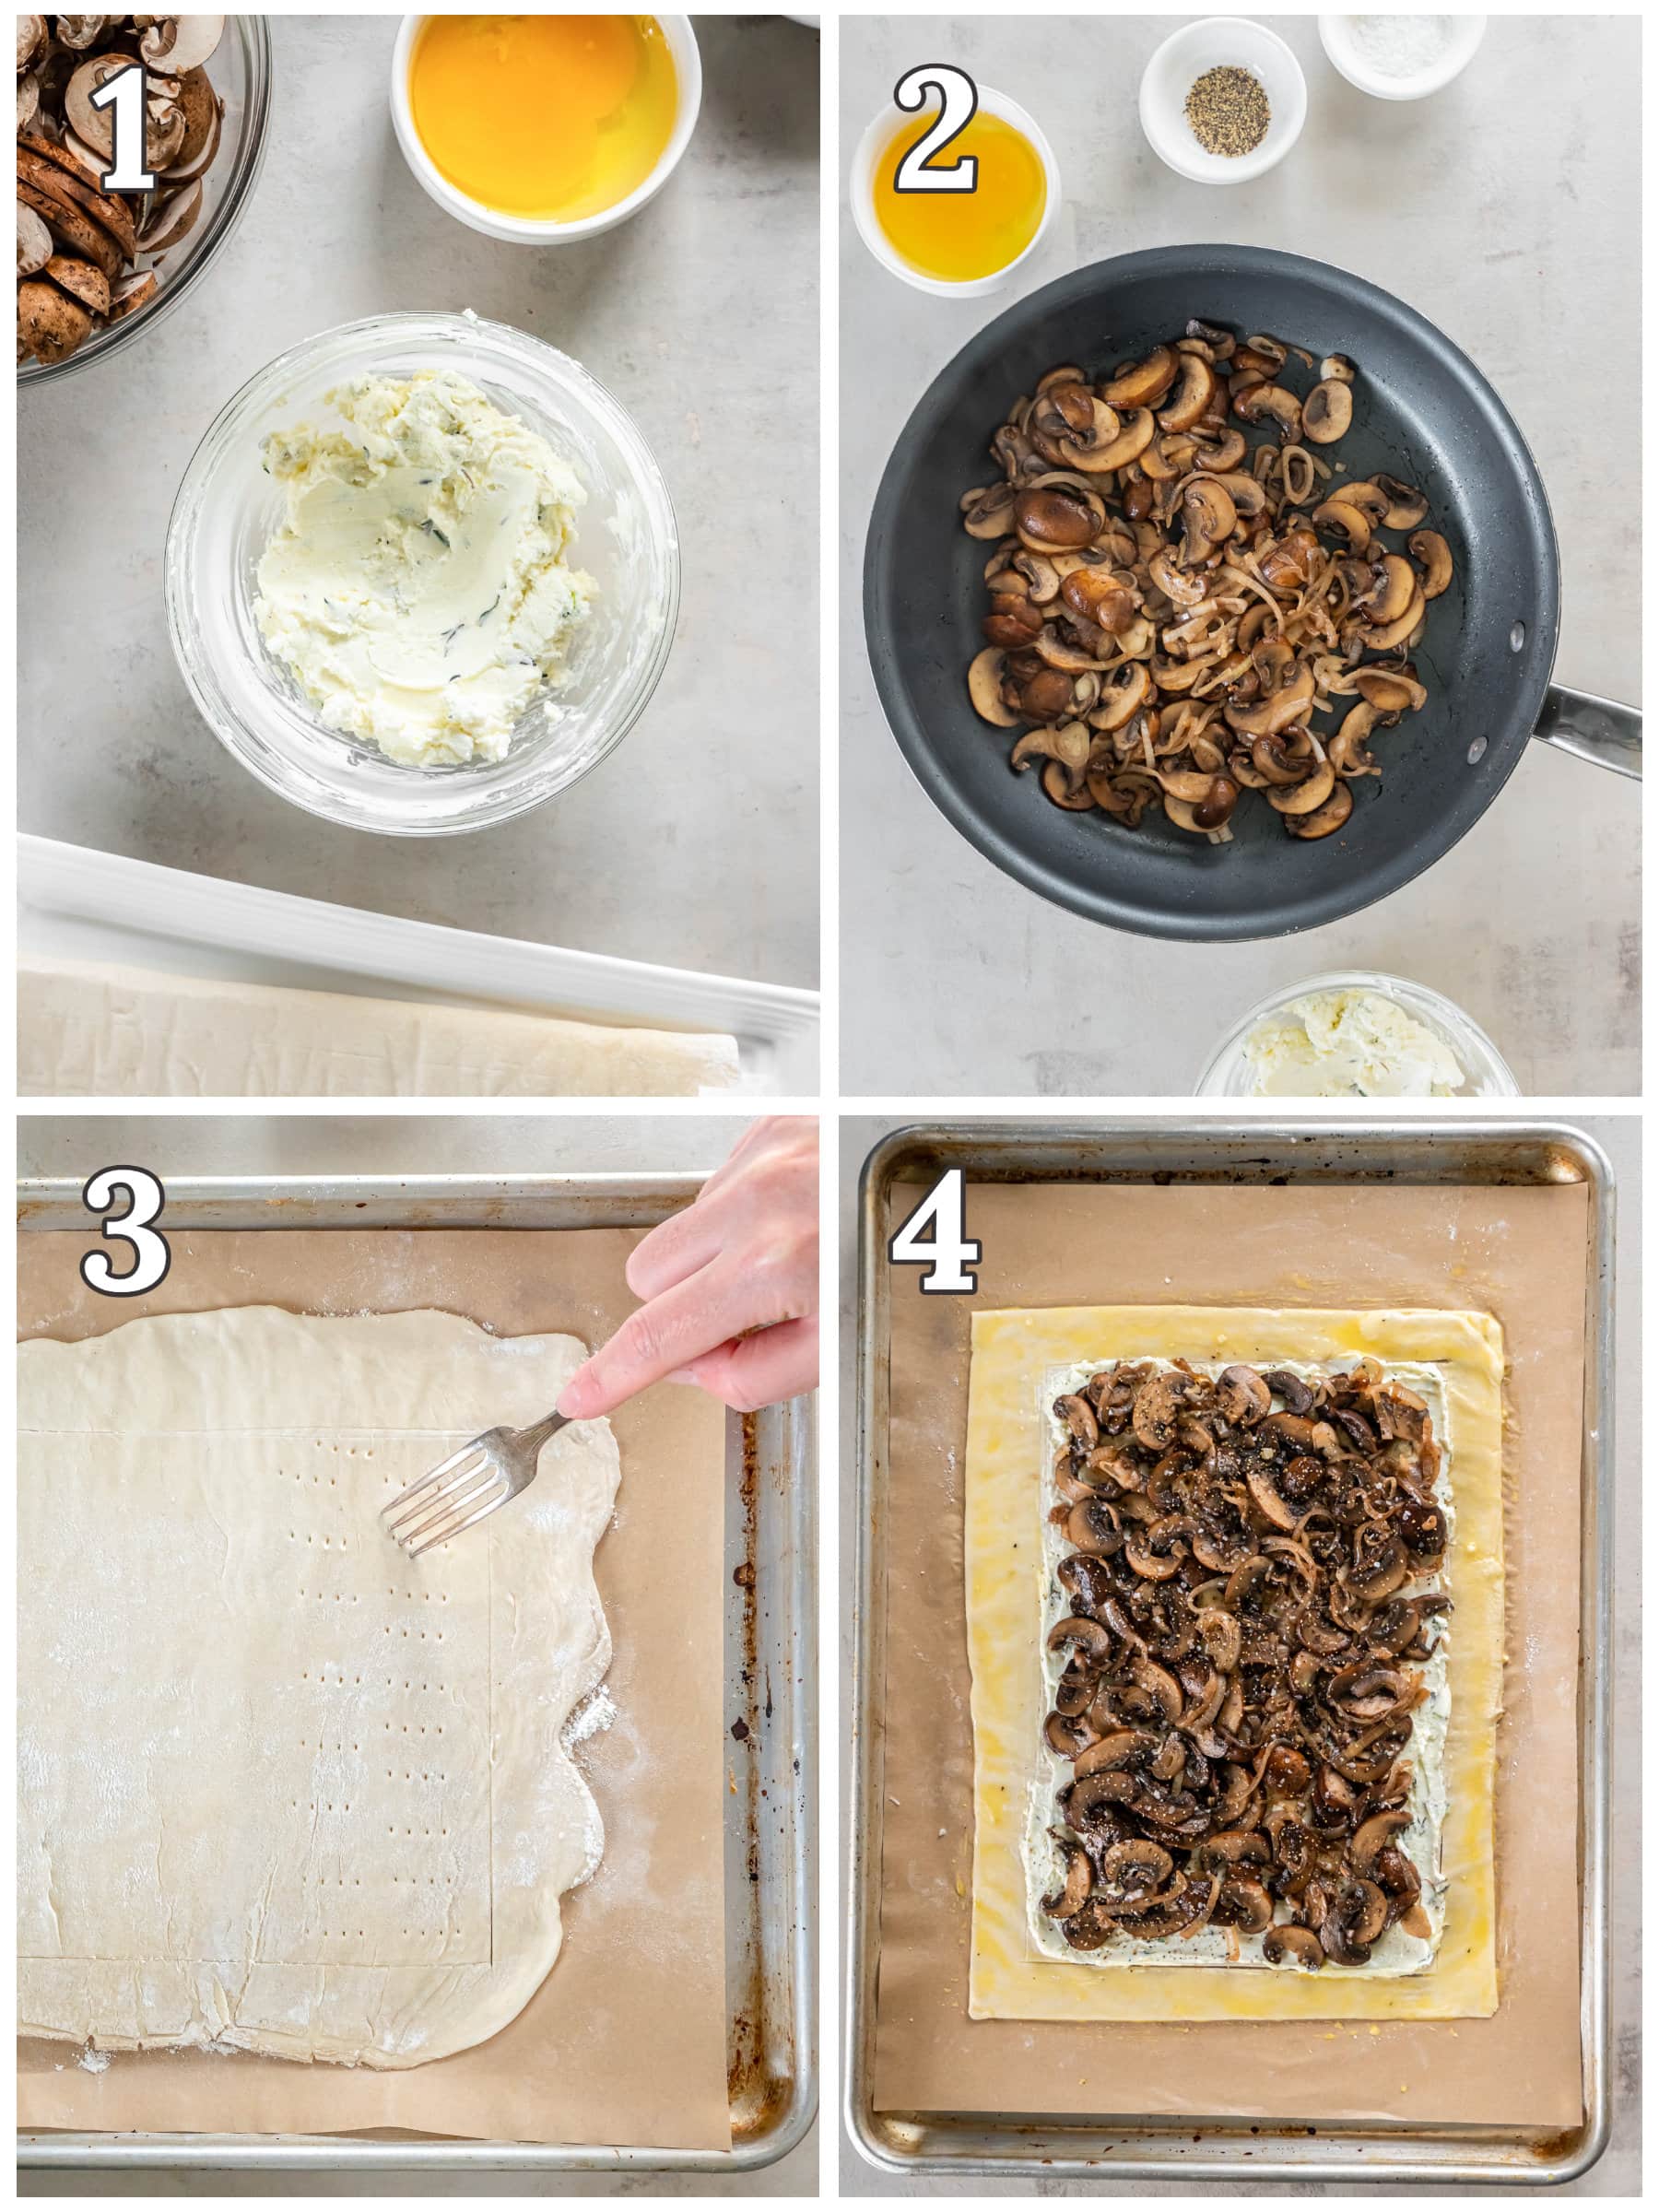 photo collage demonstrating how to make a mushroom tart with goat cheese.